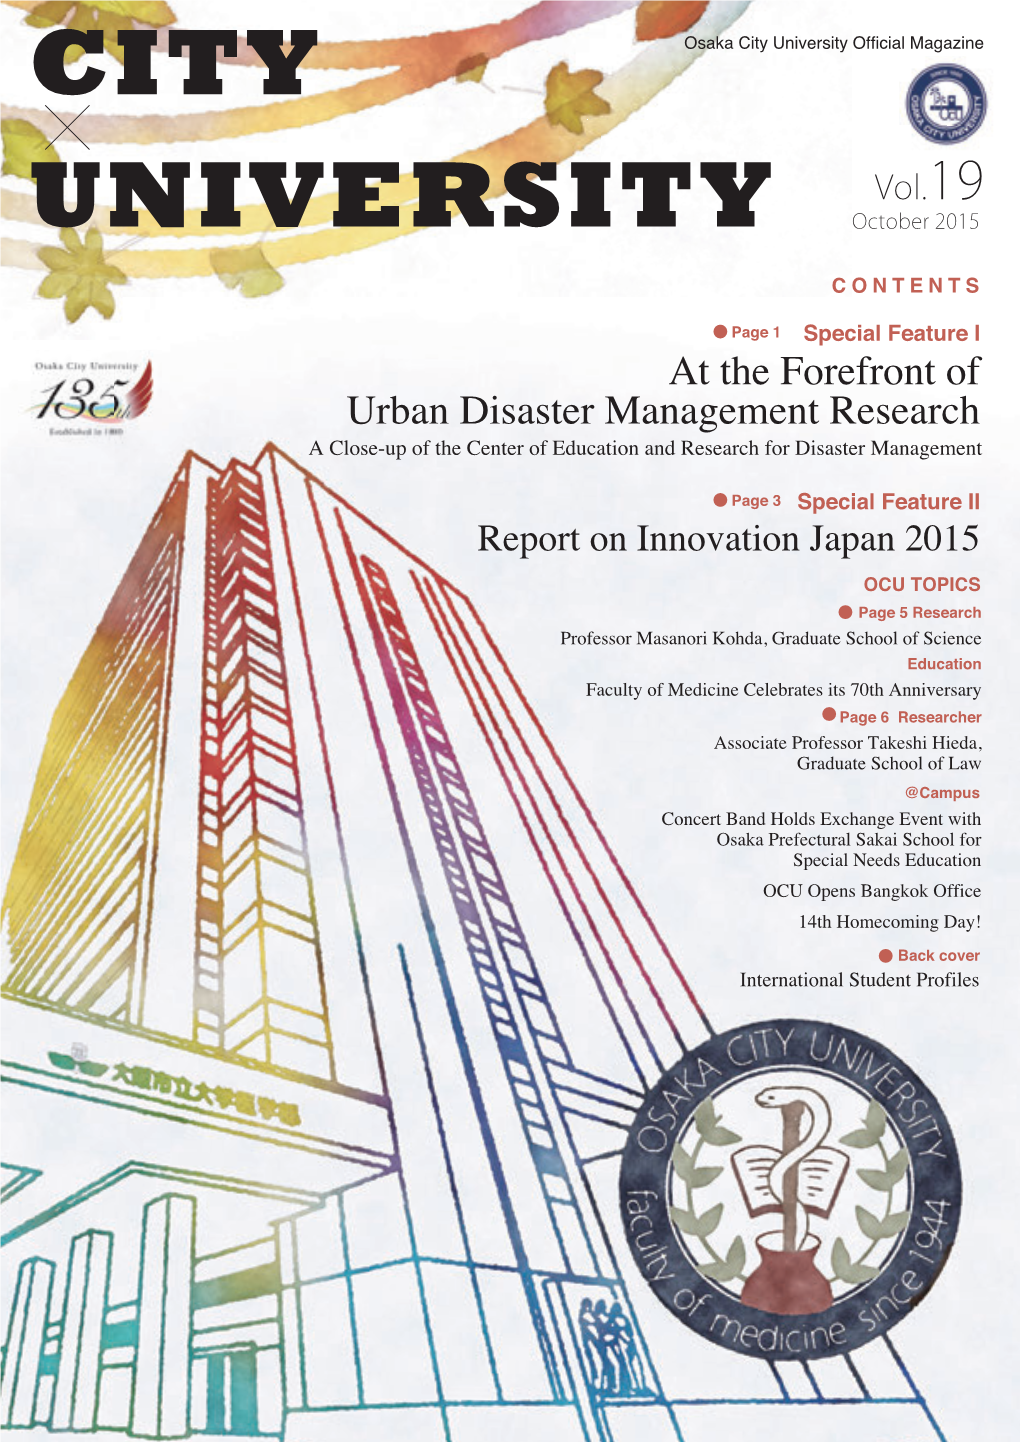 At the Forefront of Urban Disaster Management Research